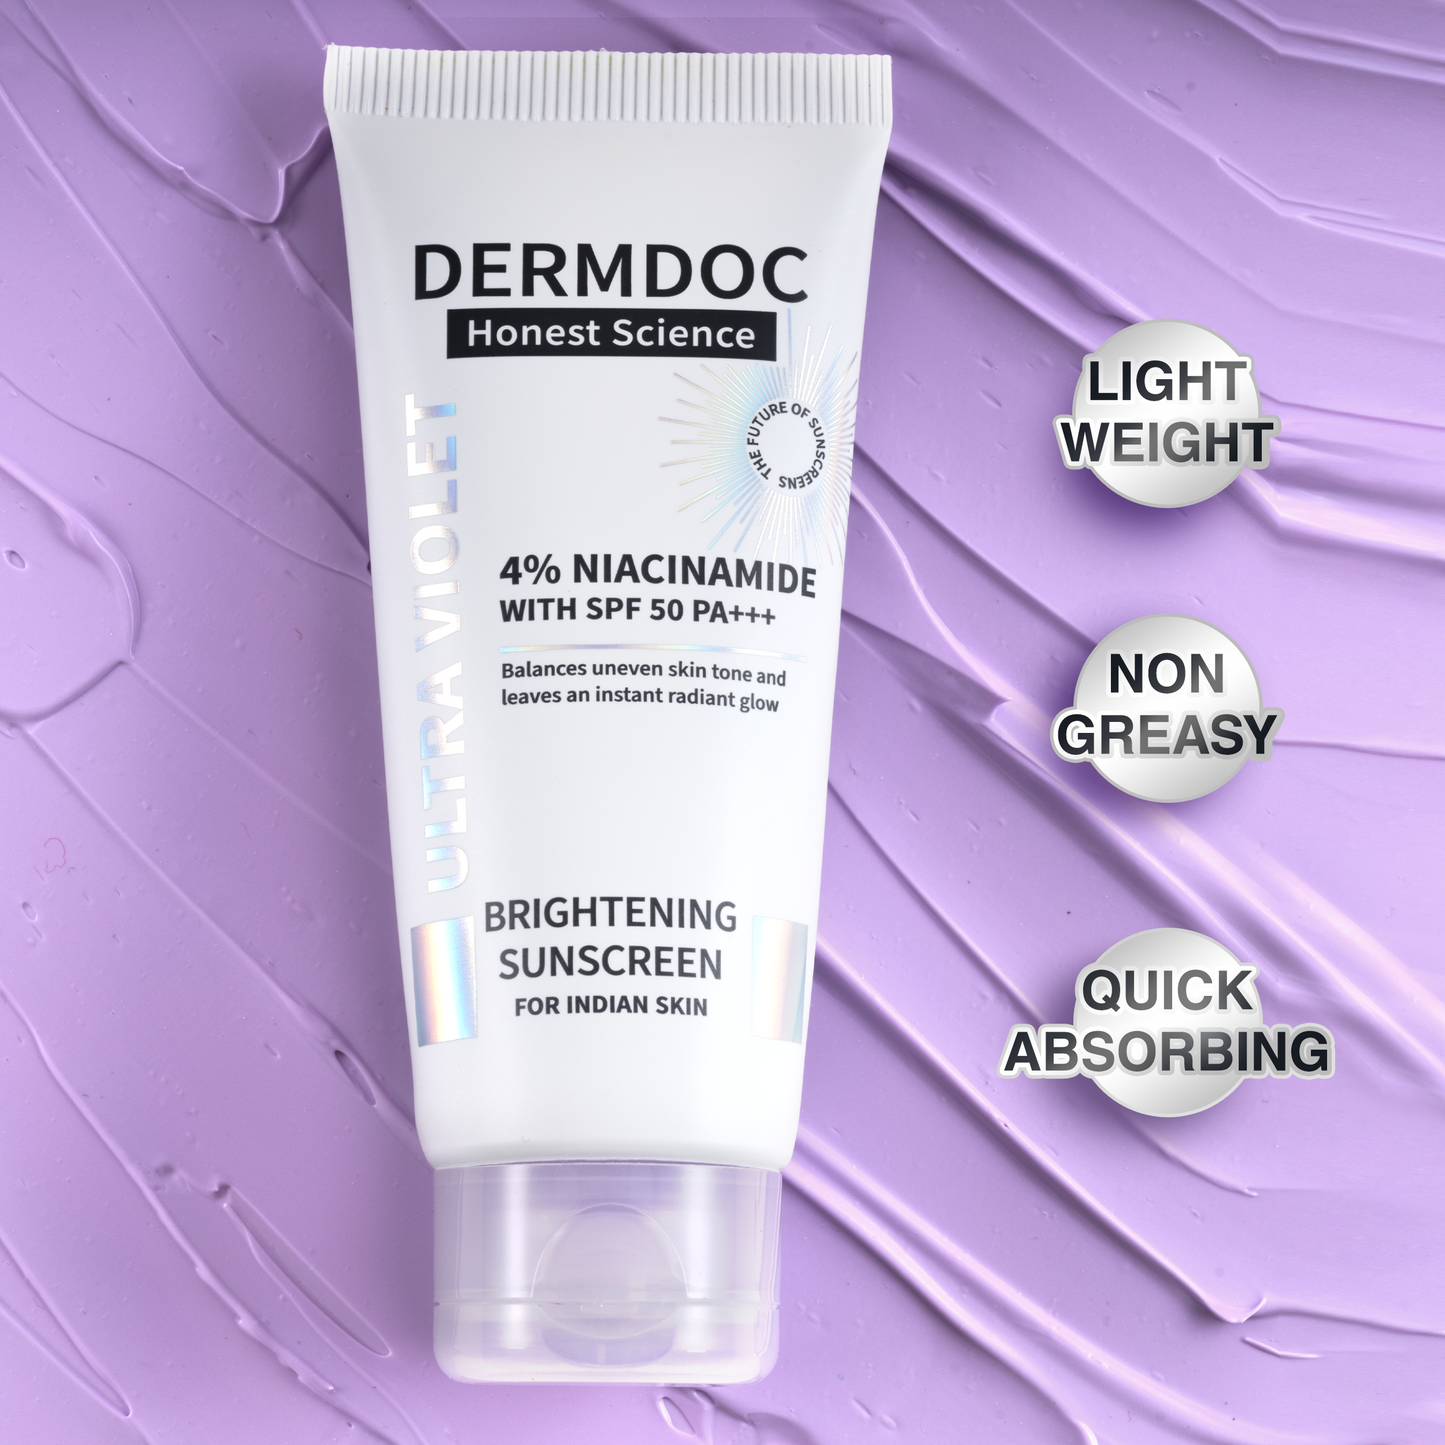 DERMDOC 4% Niacinamide with SPF 50 PA +++ Brightening Sunscreen (50 gm)